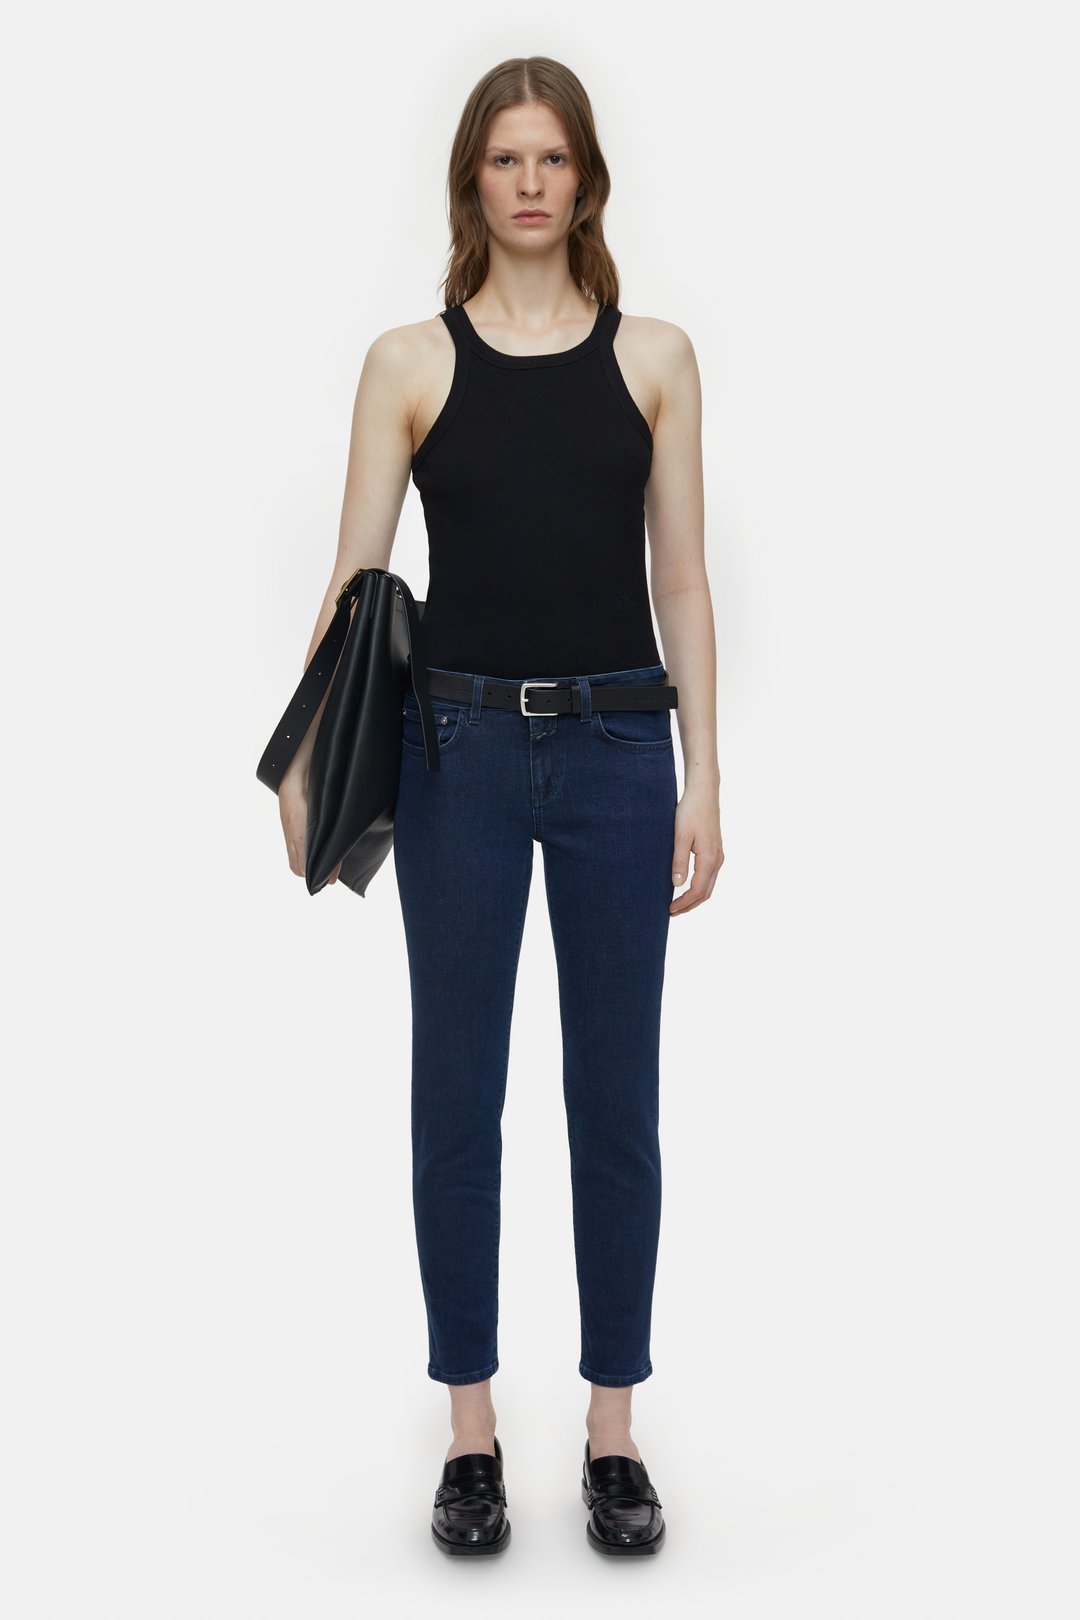 SLIM JEANS - NAME BAKER STYLE CLOSED 